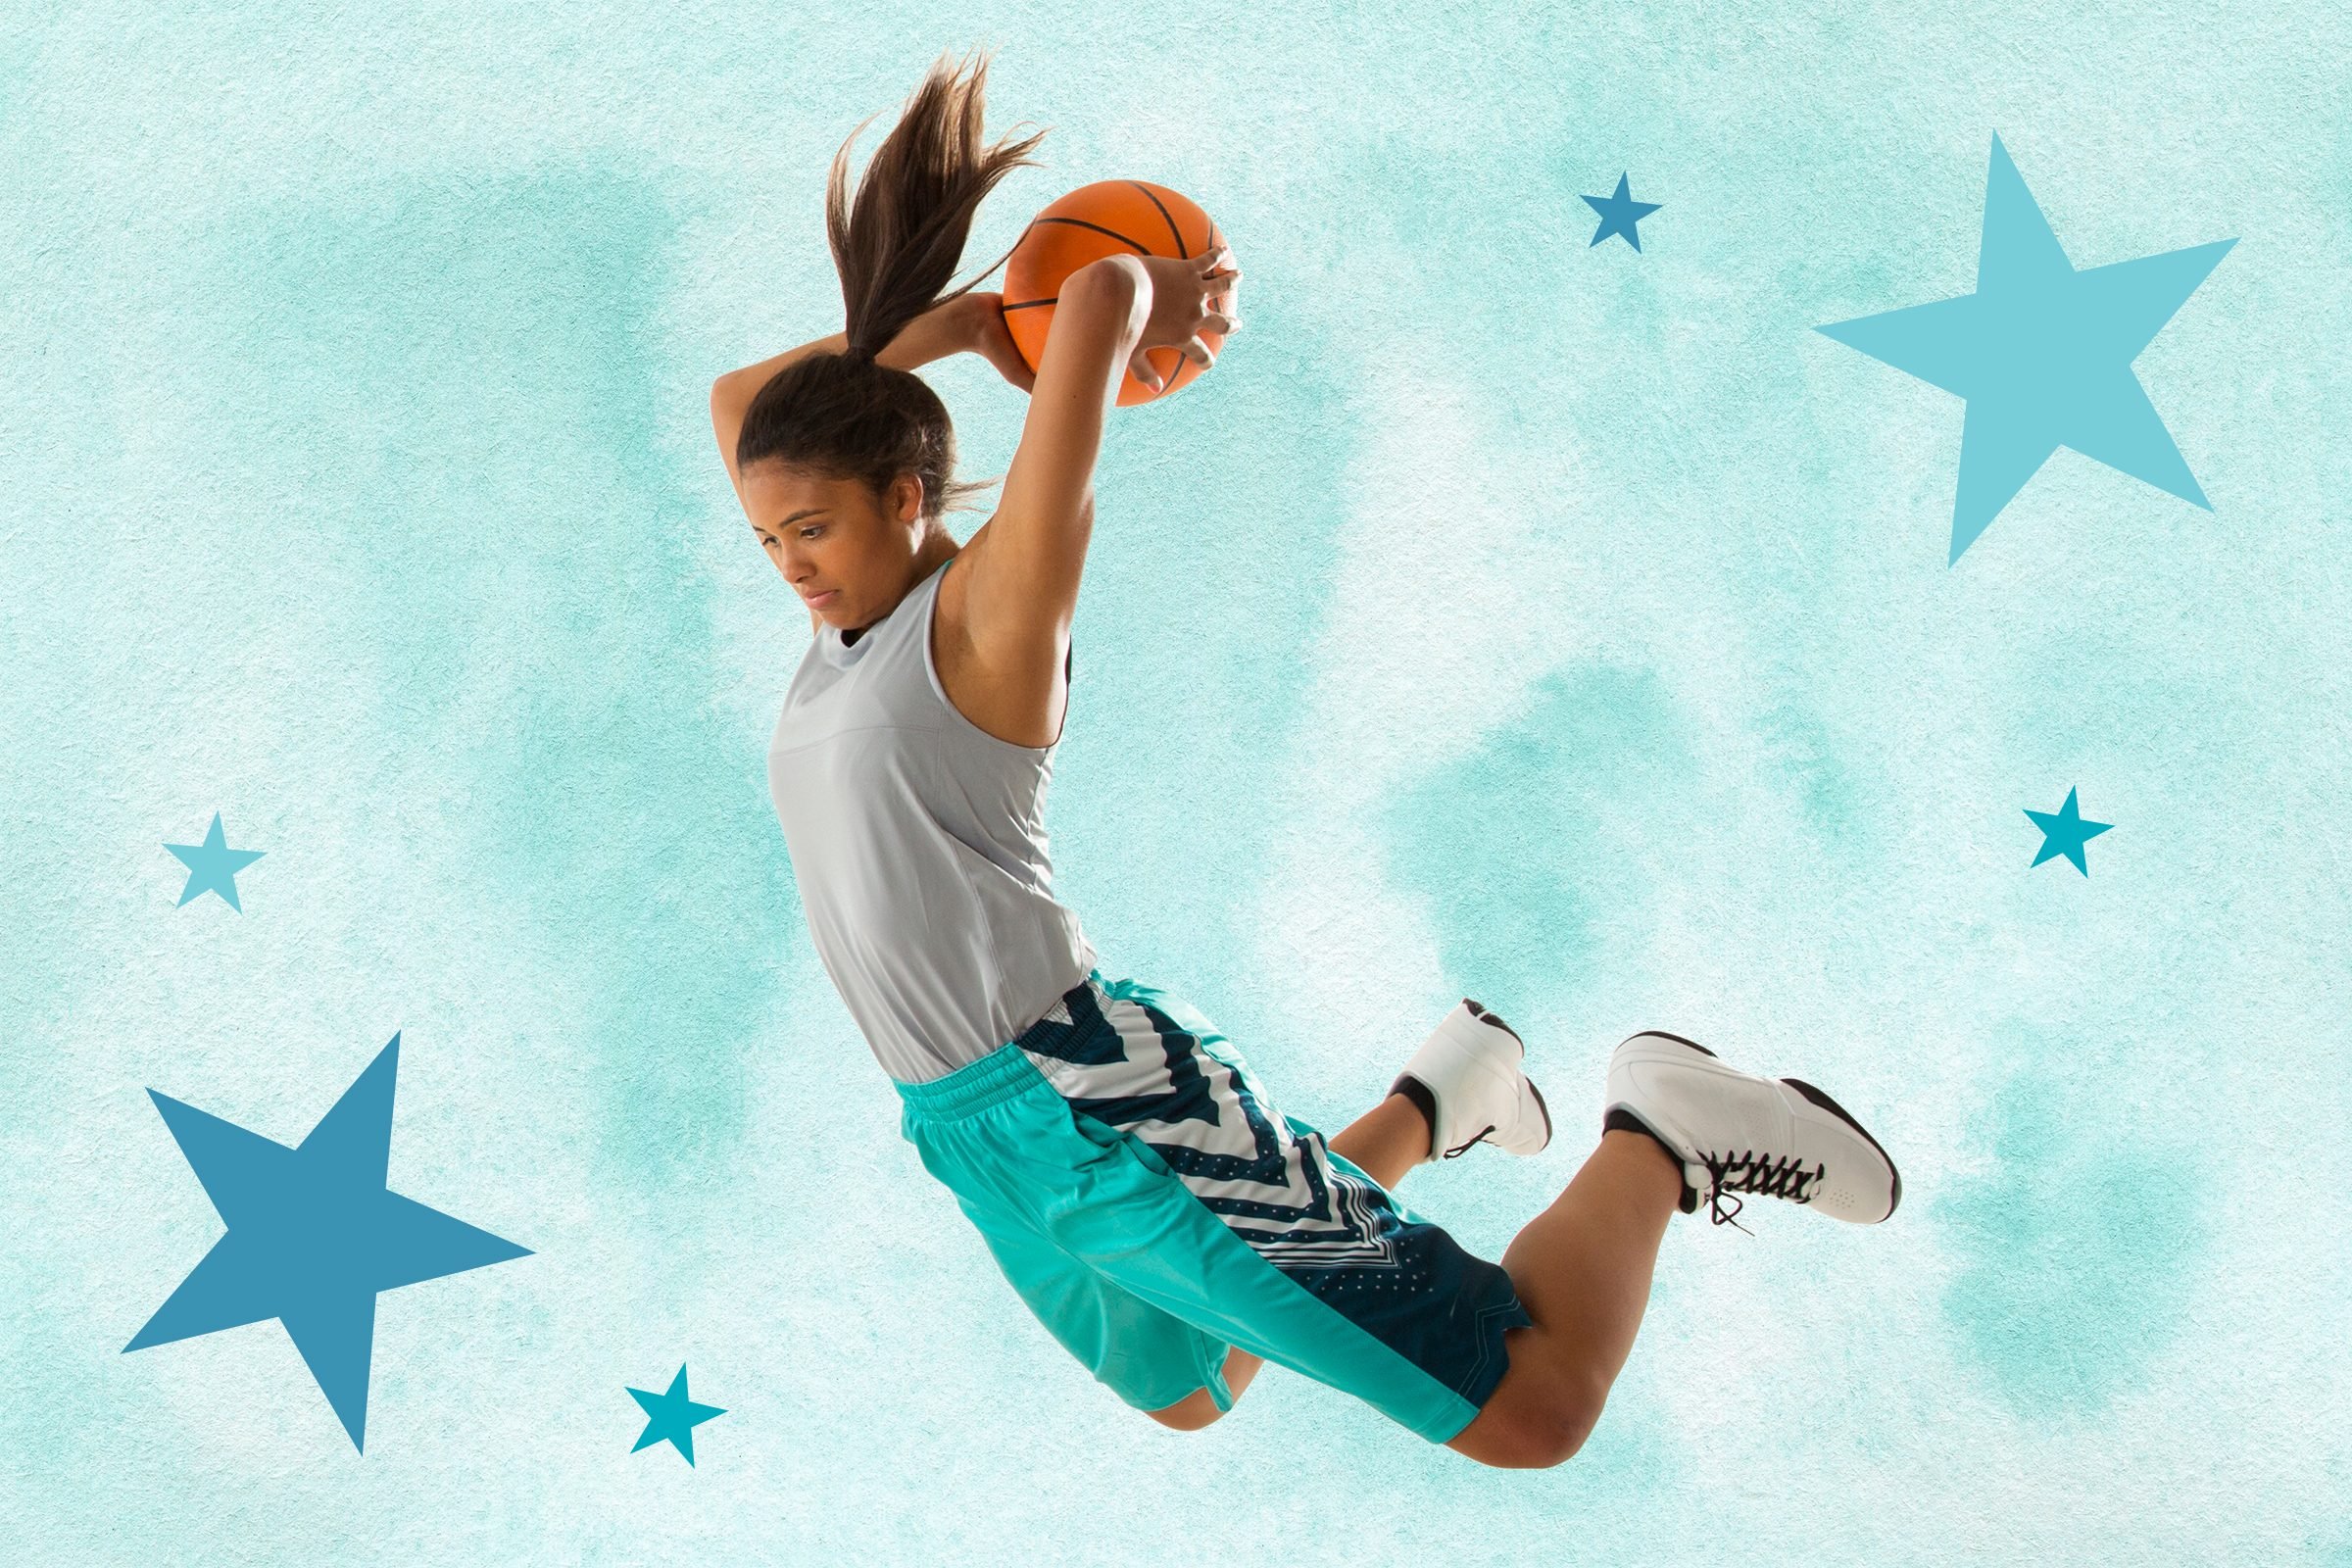 Girl jumping in the air about to dunk a basketball